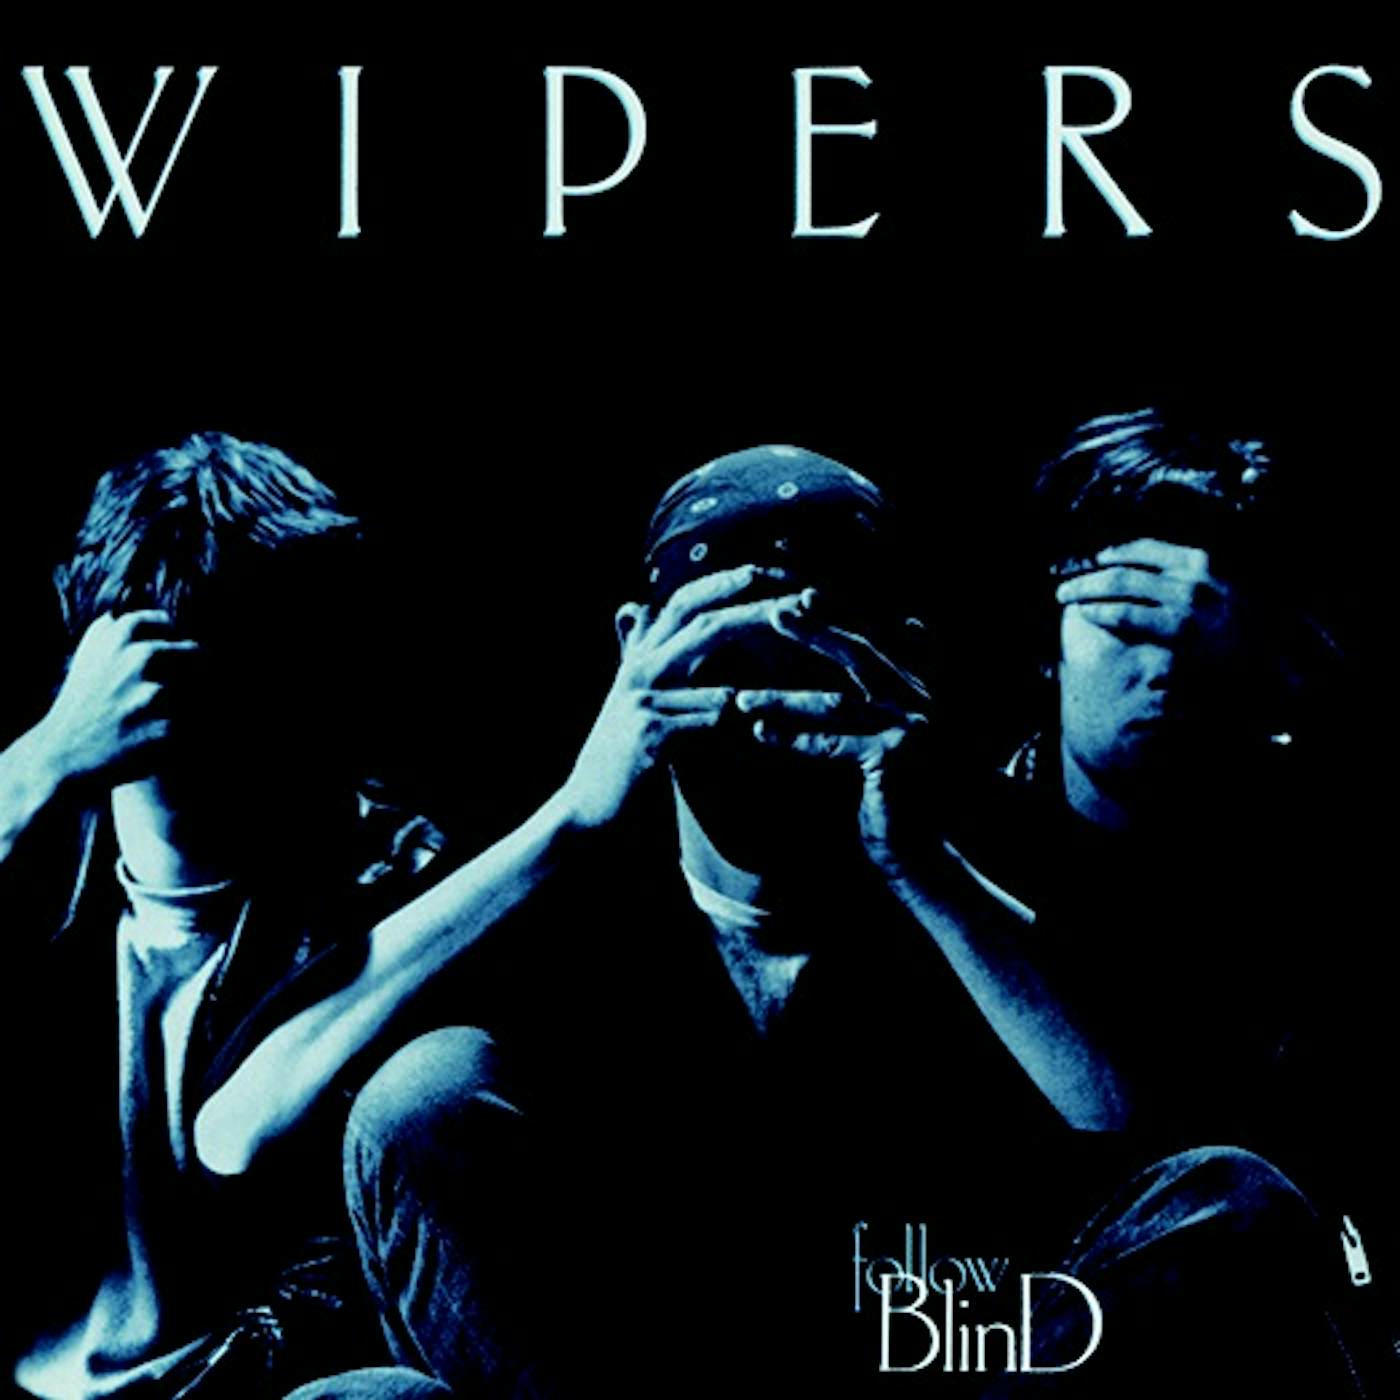 Wipers FOLLOW BLIND (2016 REISSUE) CD